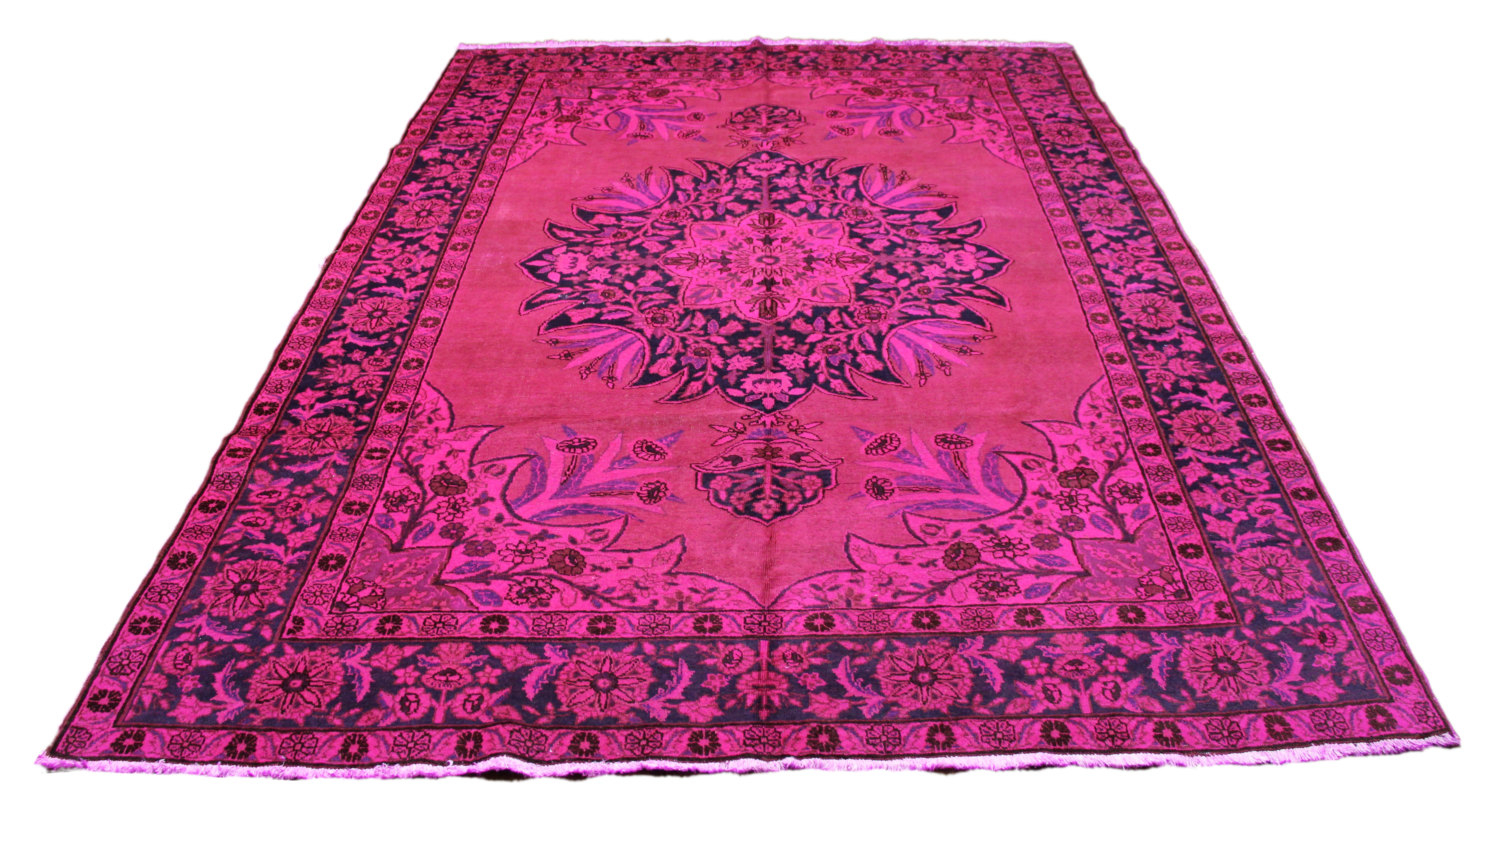 Hot Pink 7x10 Antique Persian Tabriz Overdyed Rug 2728